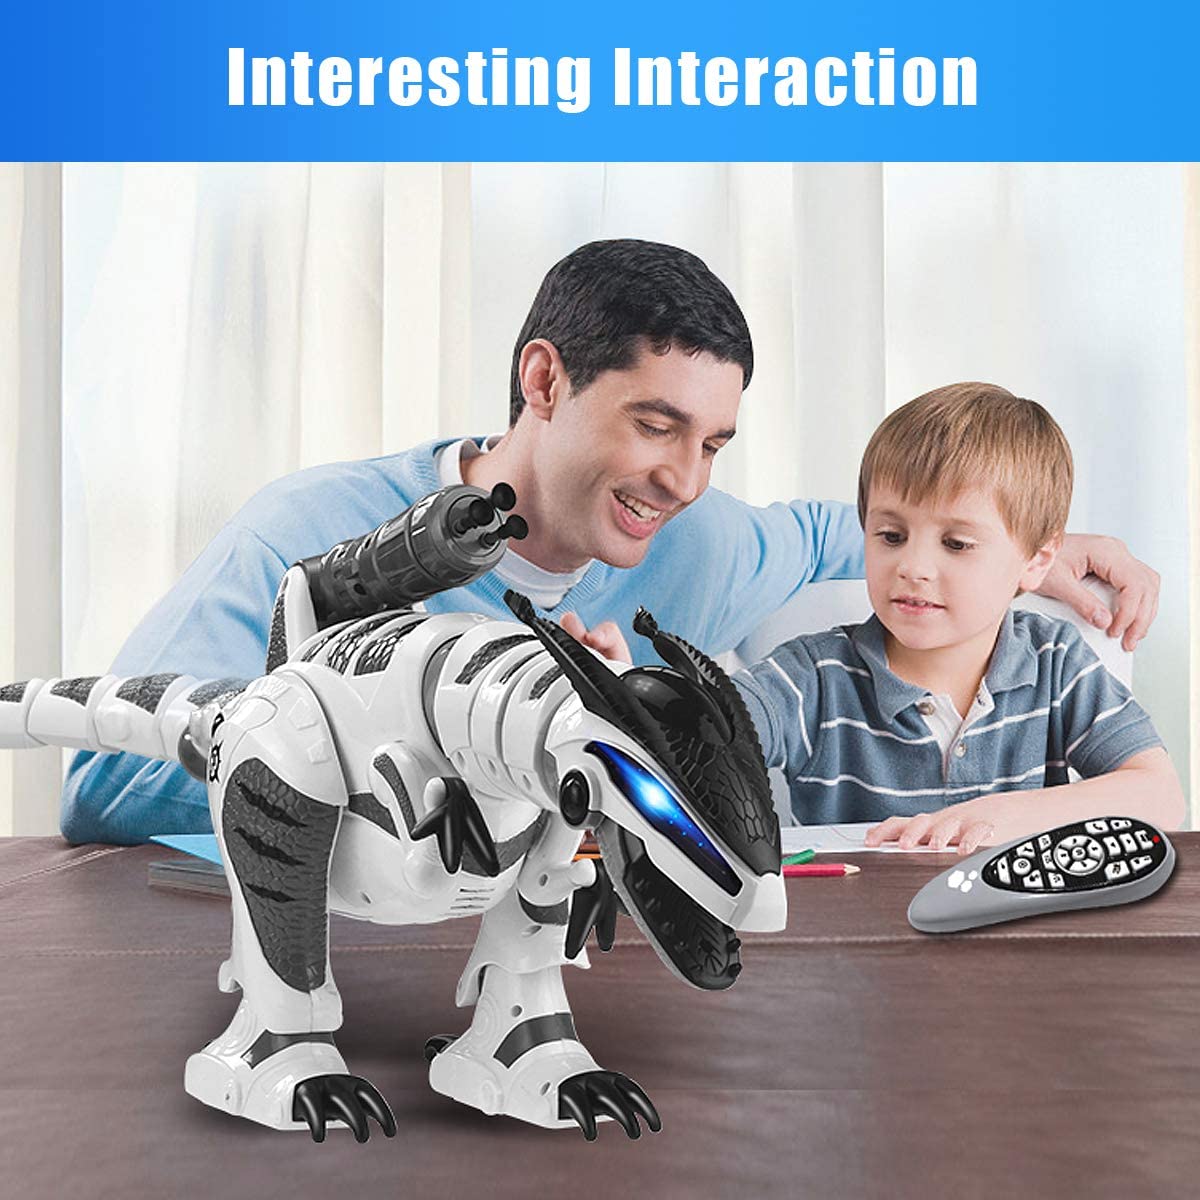 Fistone RC Robot Dinosaur Intelligent Interactive Smart Toy Electronic Remote Controller Robot Walking Dancing Singing with Fight Mode Toys for Kids Boys Girls Age 5 6 7 8 9 10 and Up Year Old - (For 4 piece(s))